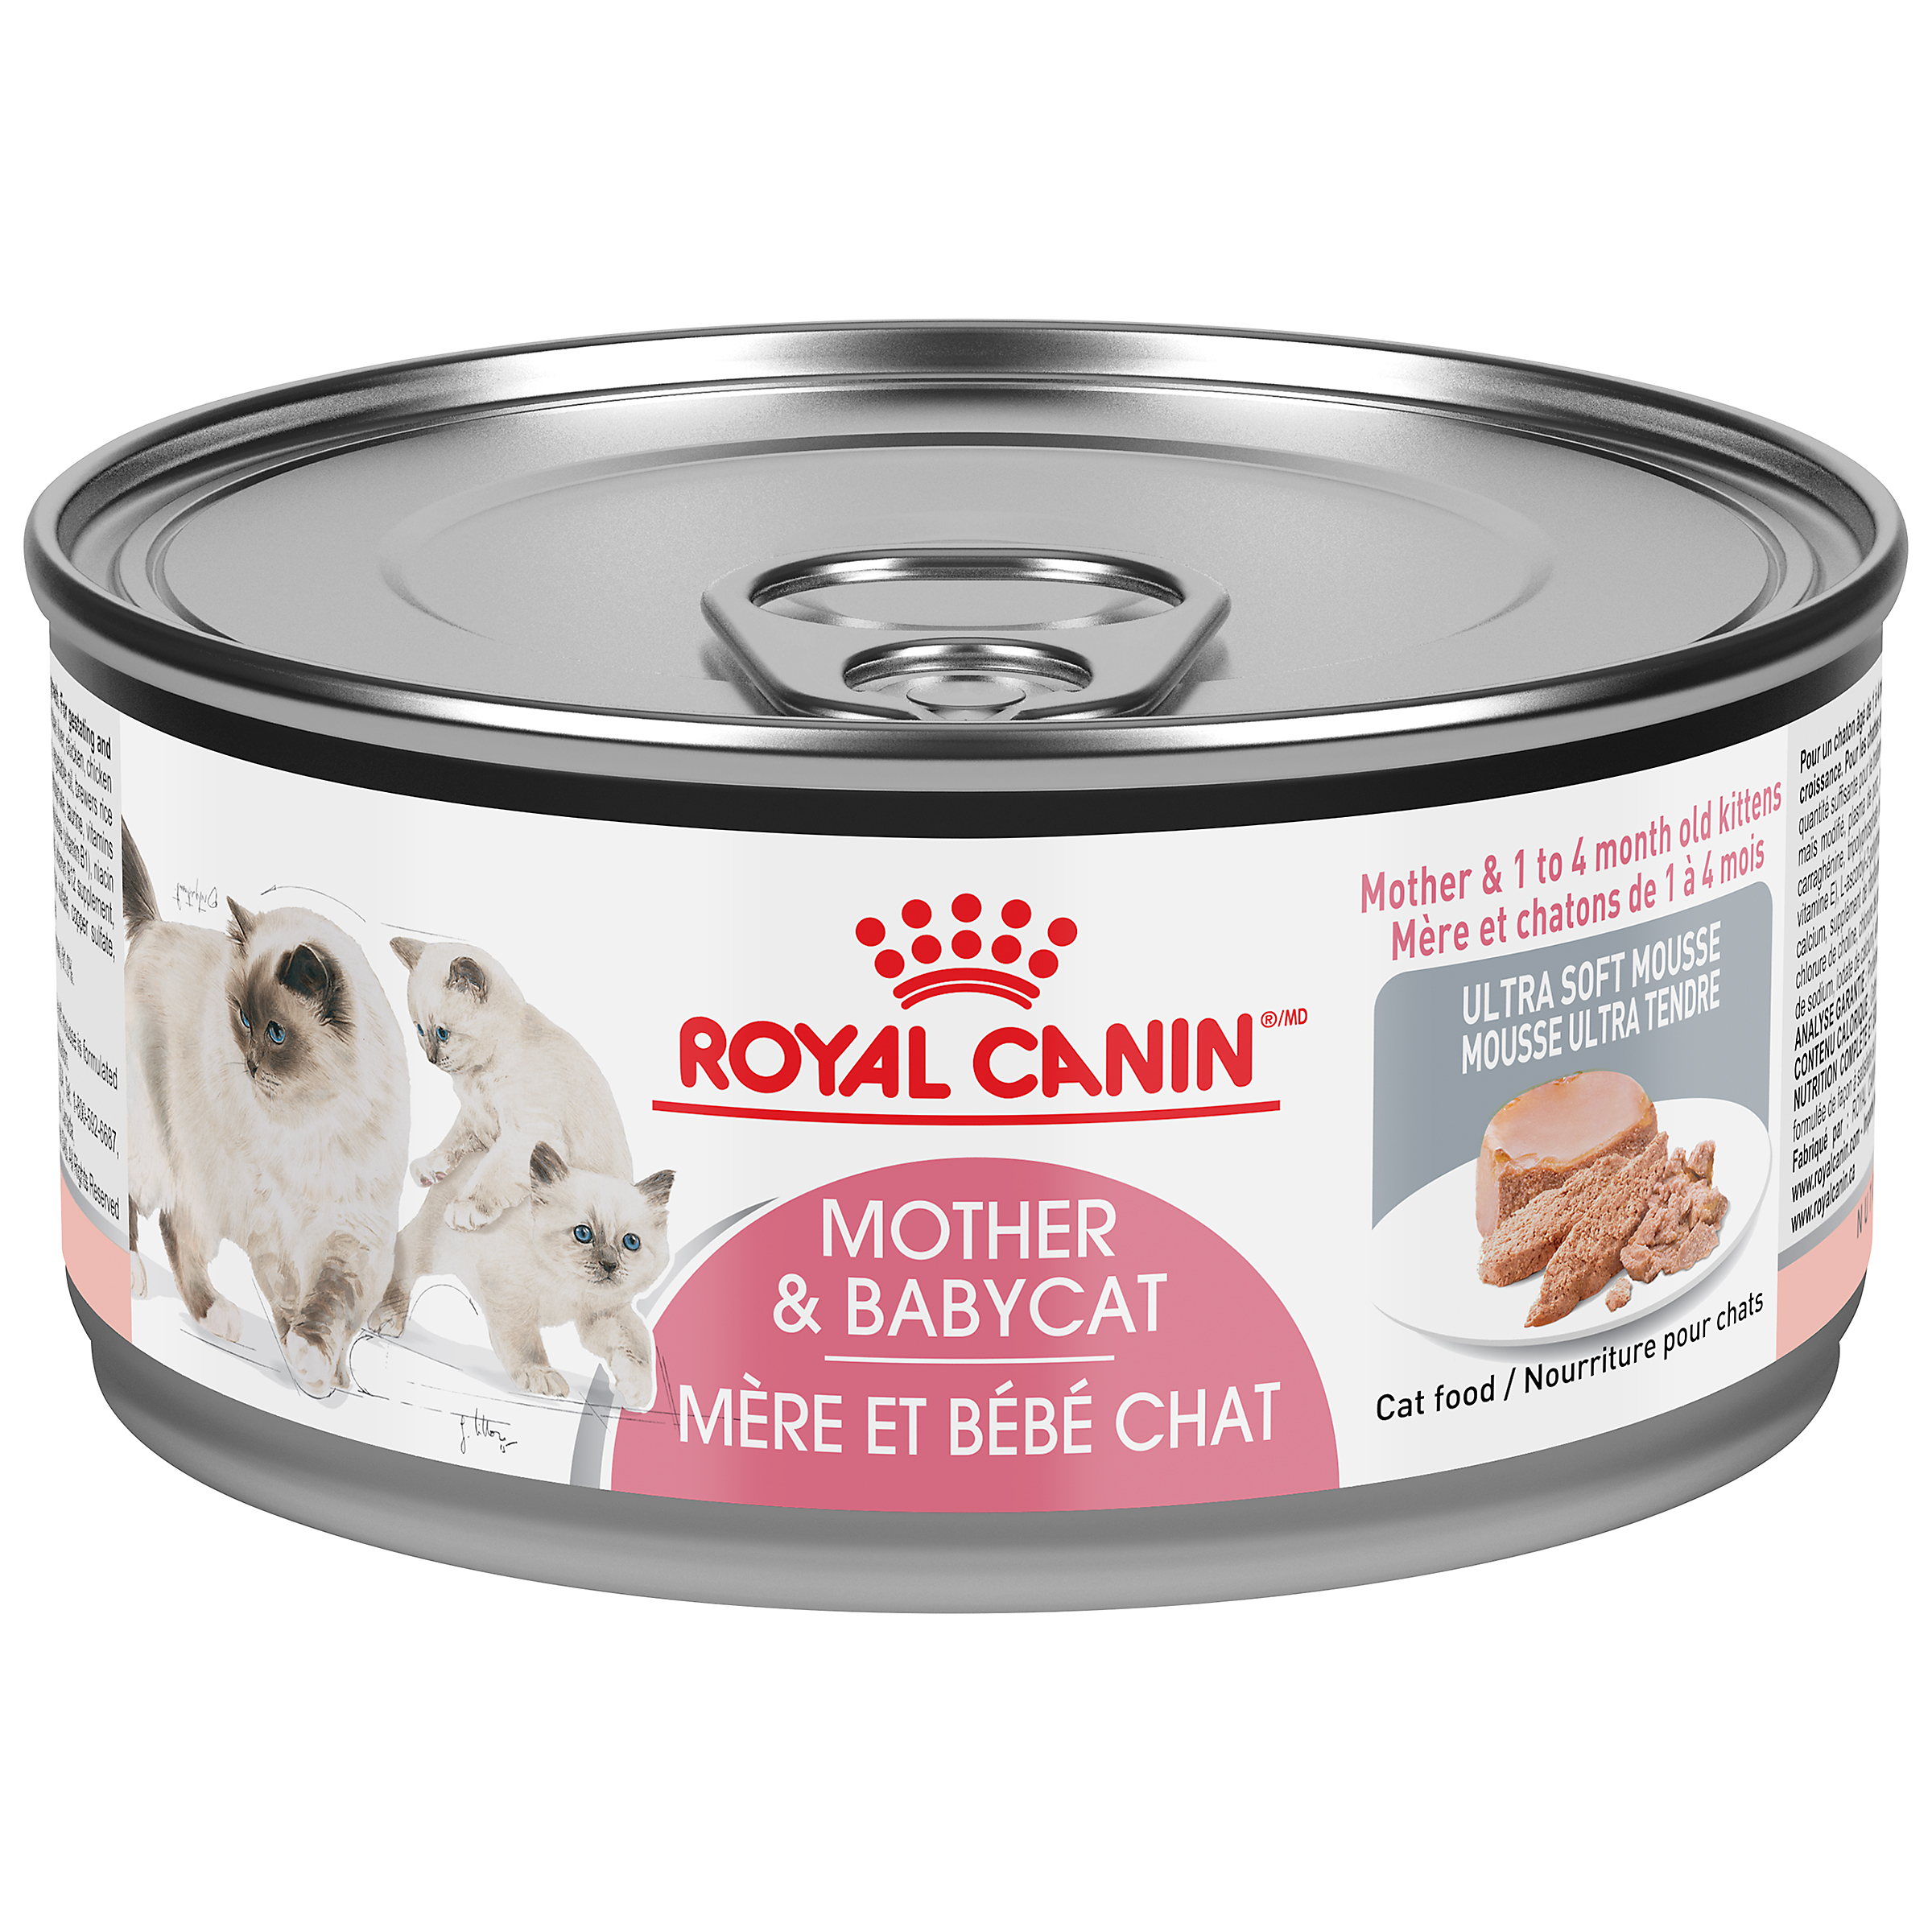 Mother & Babycat Ultra Soft Mousse Canned Cat Food